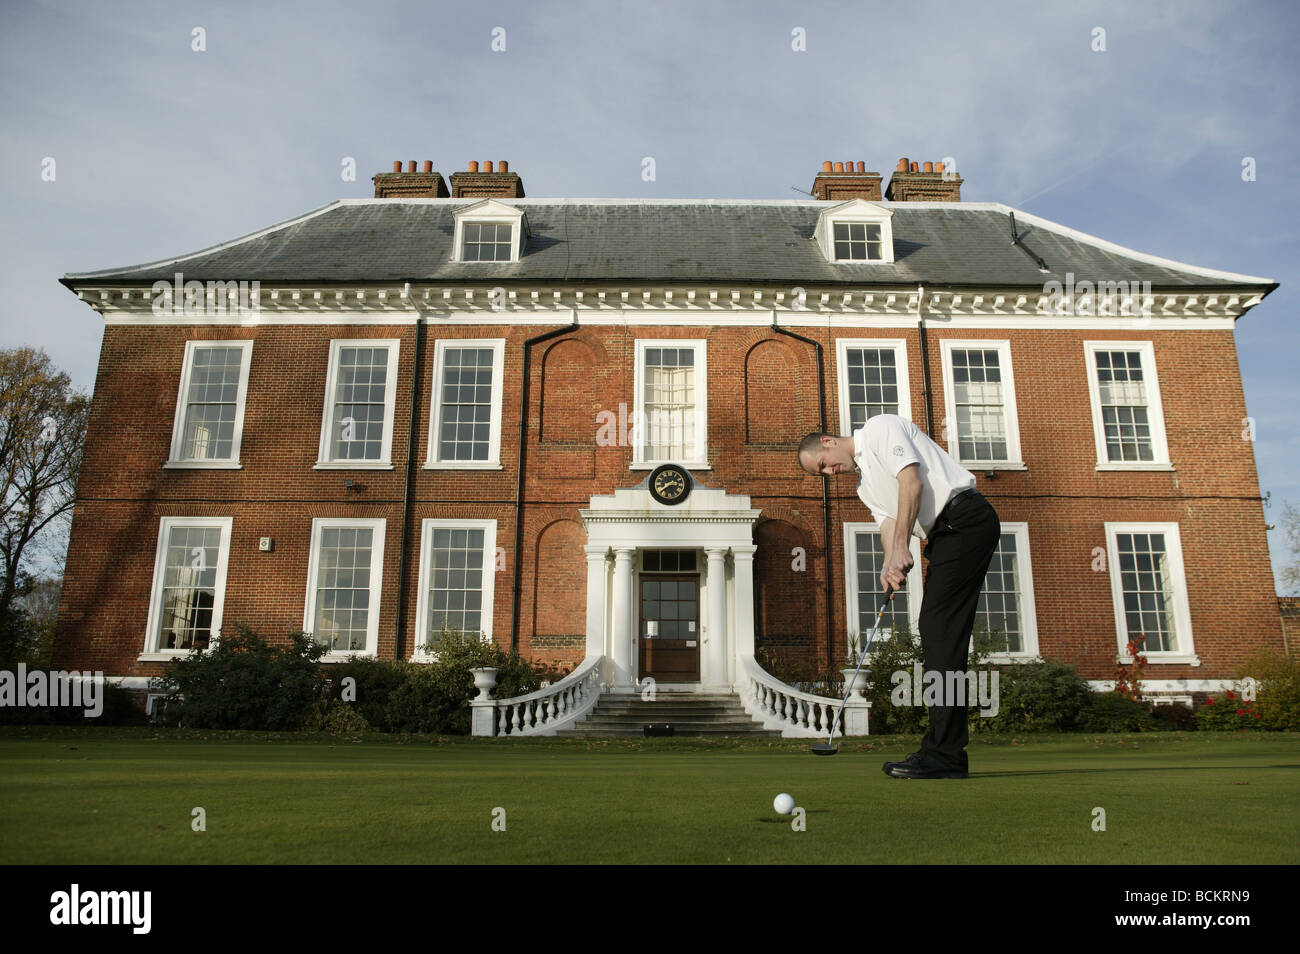 A Golfer takes a putt in front of a prestigious Club House. Stock Photo